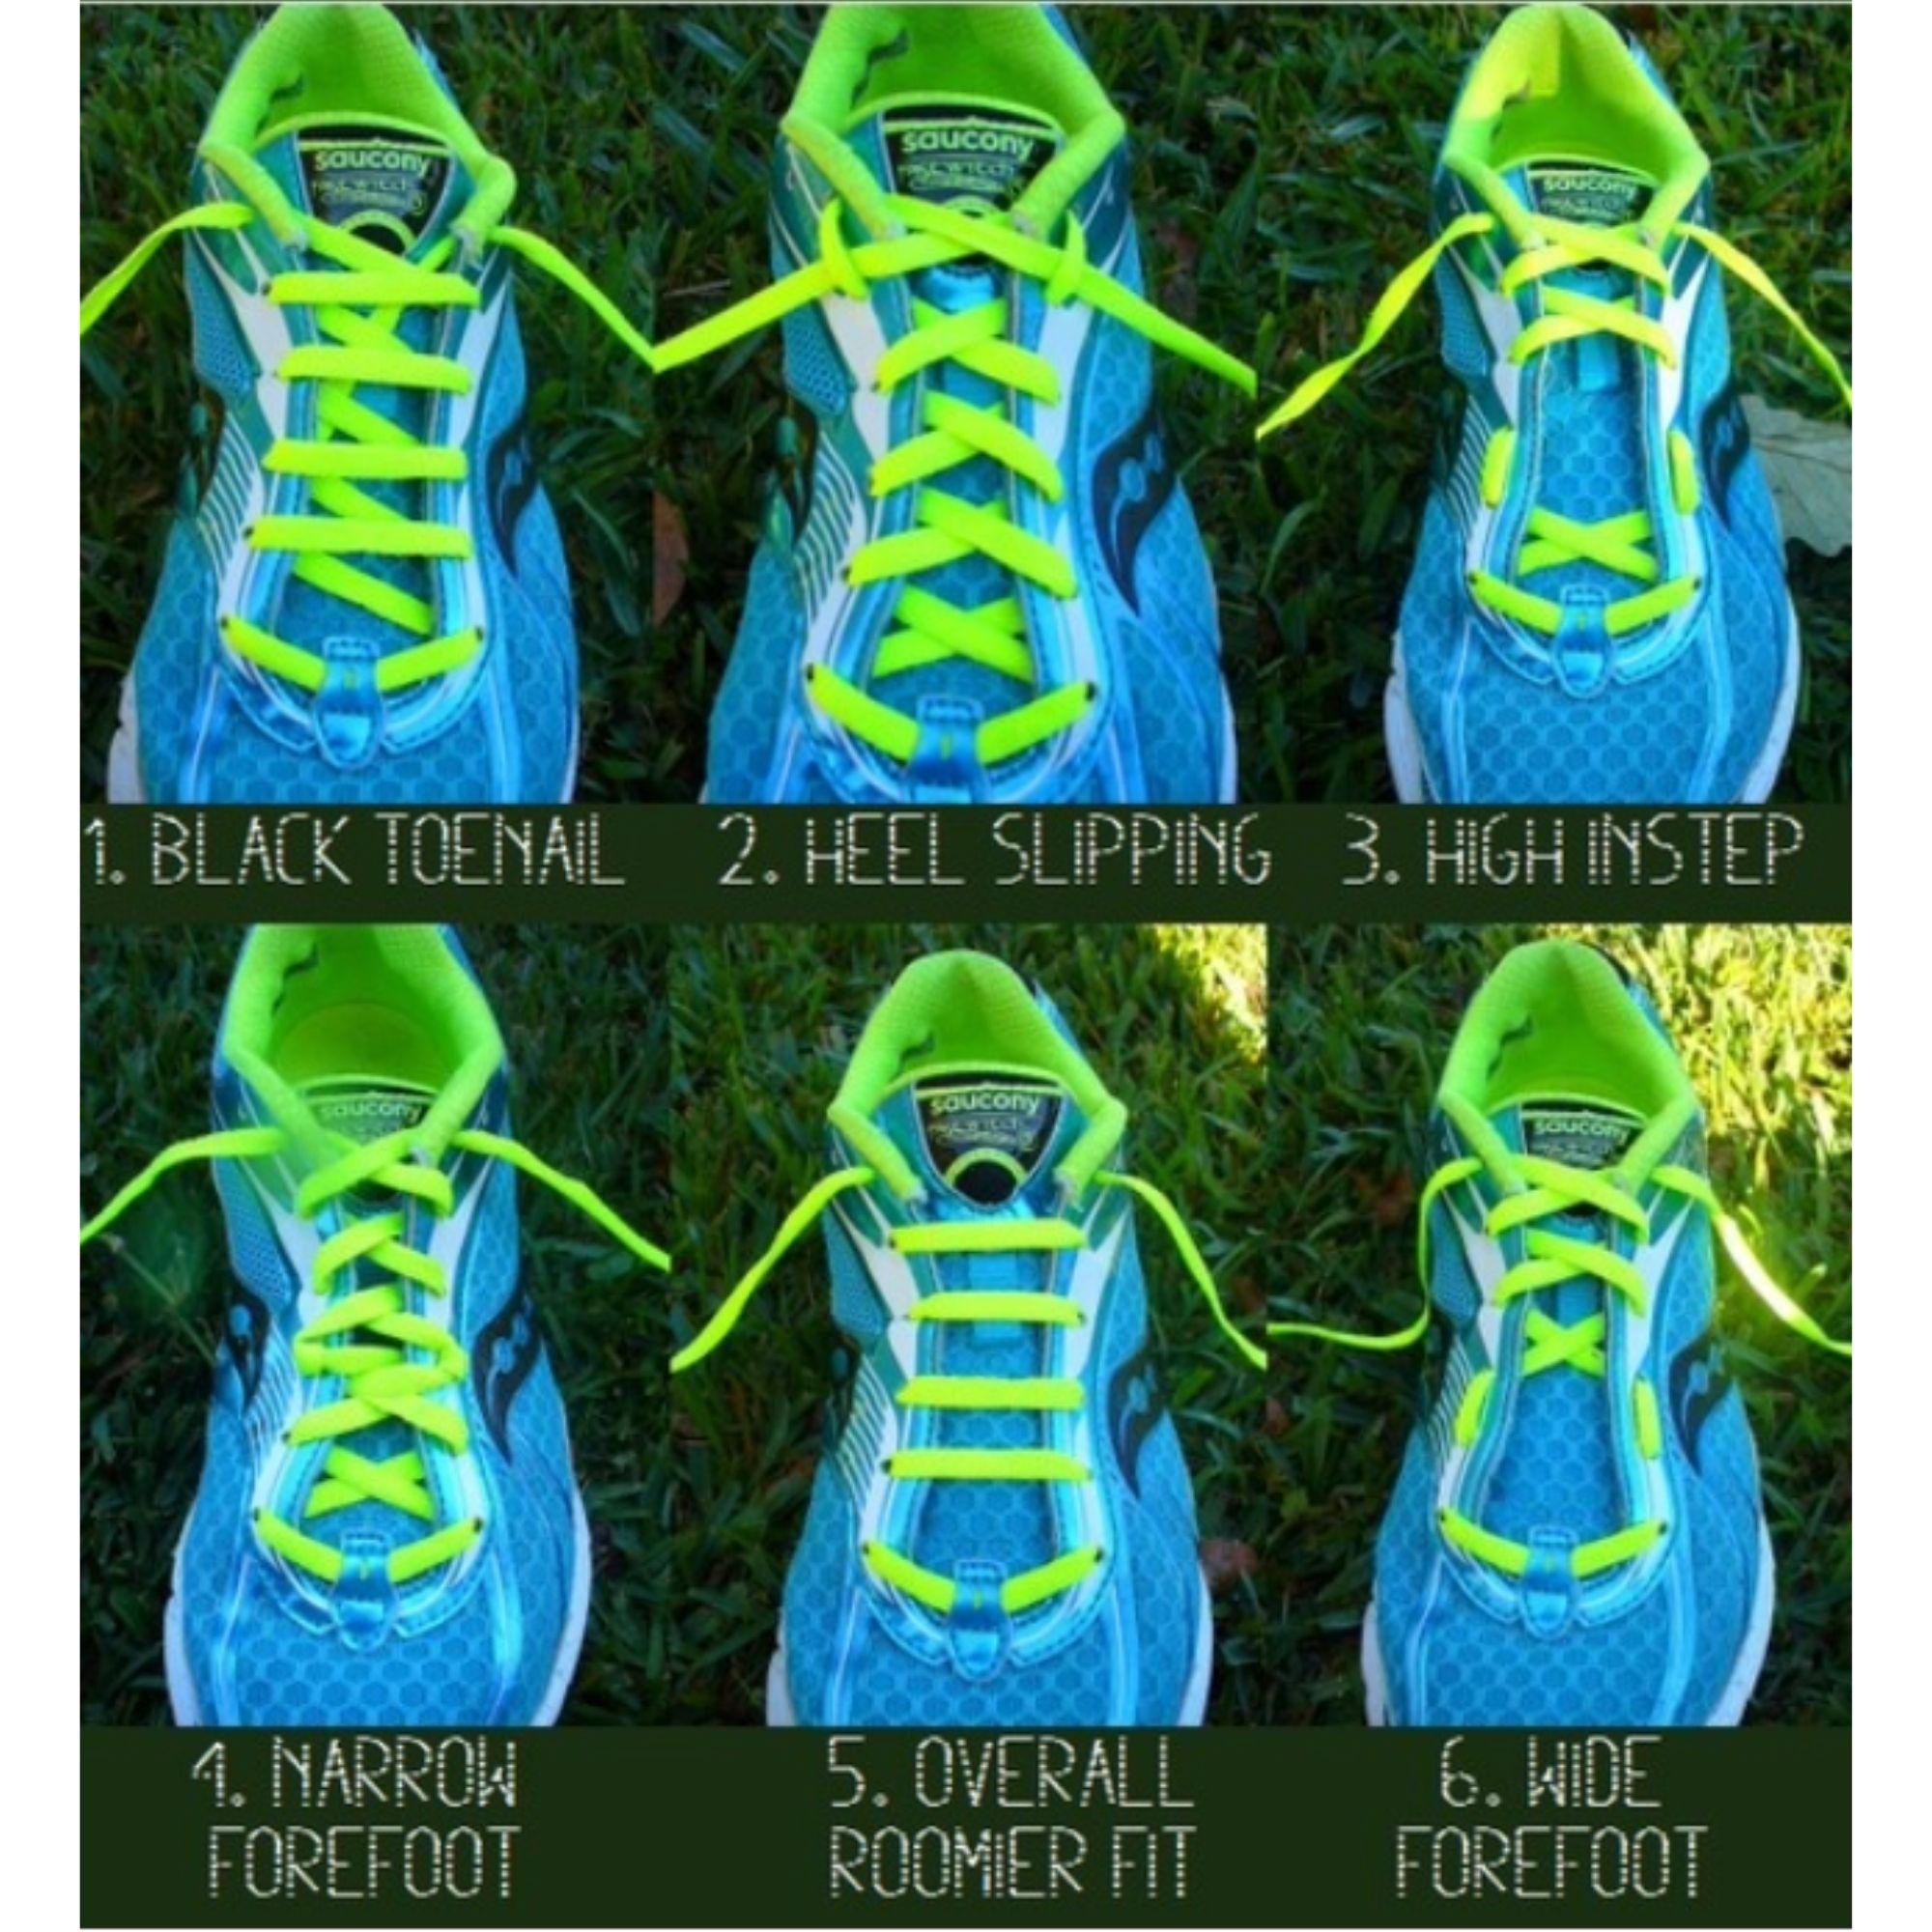 Lacekeeper 2  keeps shoelaces tied and out of the way best lacelock